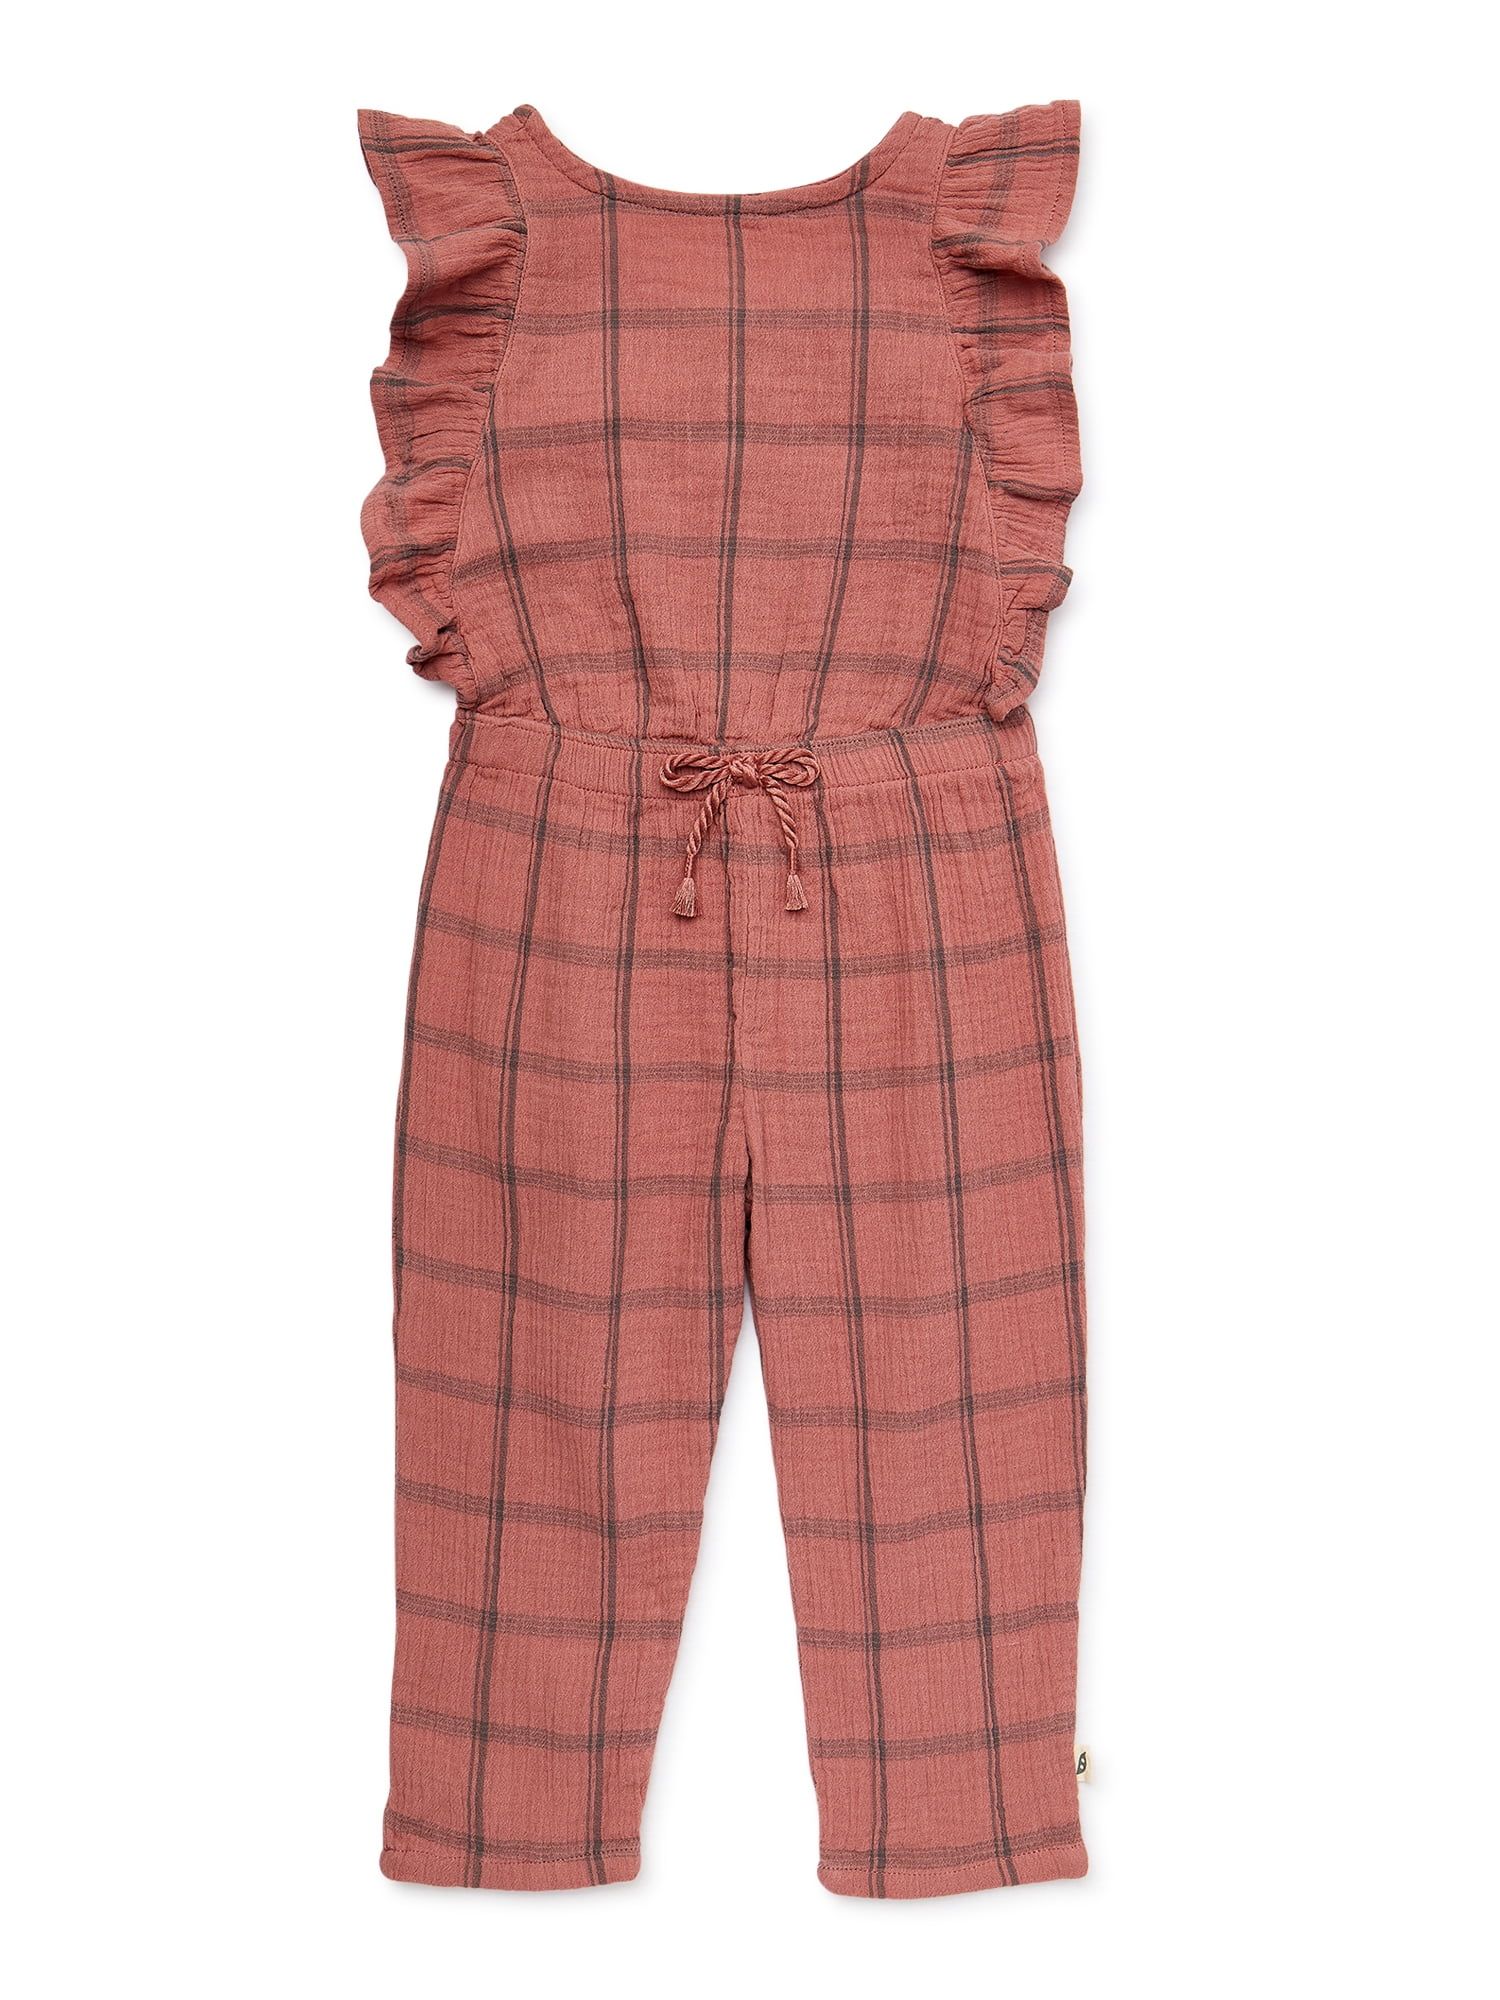 easy-peasy Baby and Toddler Girl Jumpsuit, Sizes 12 Months-5T | Walmart (US)